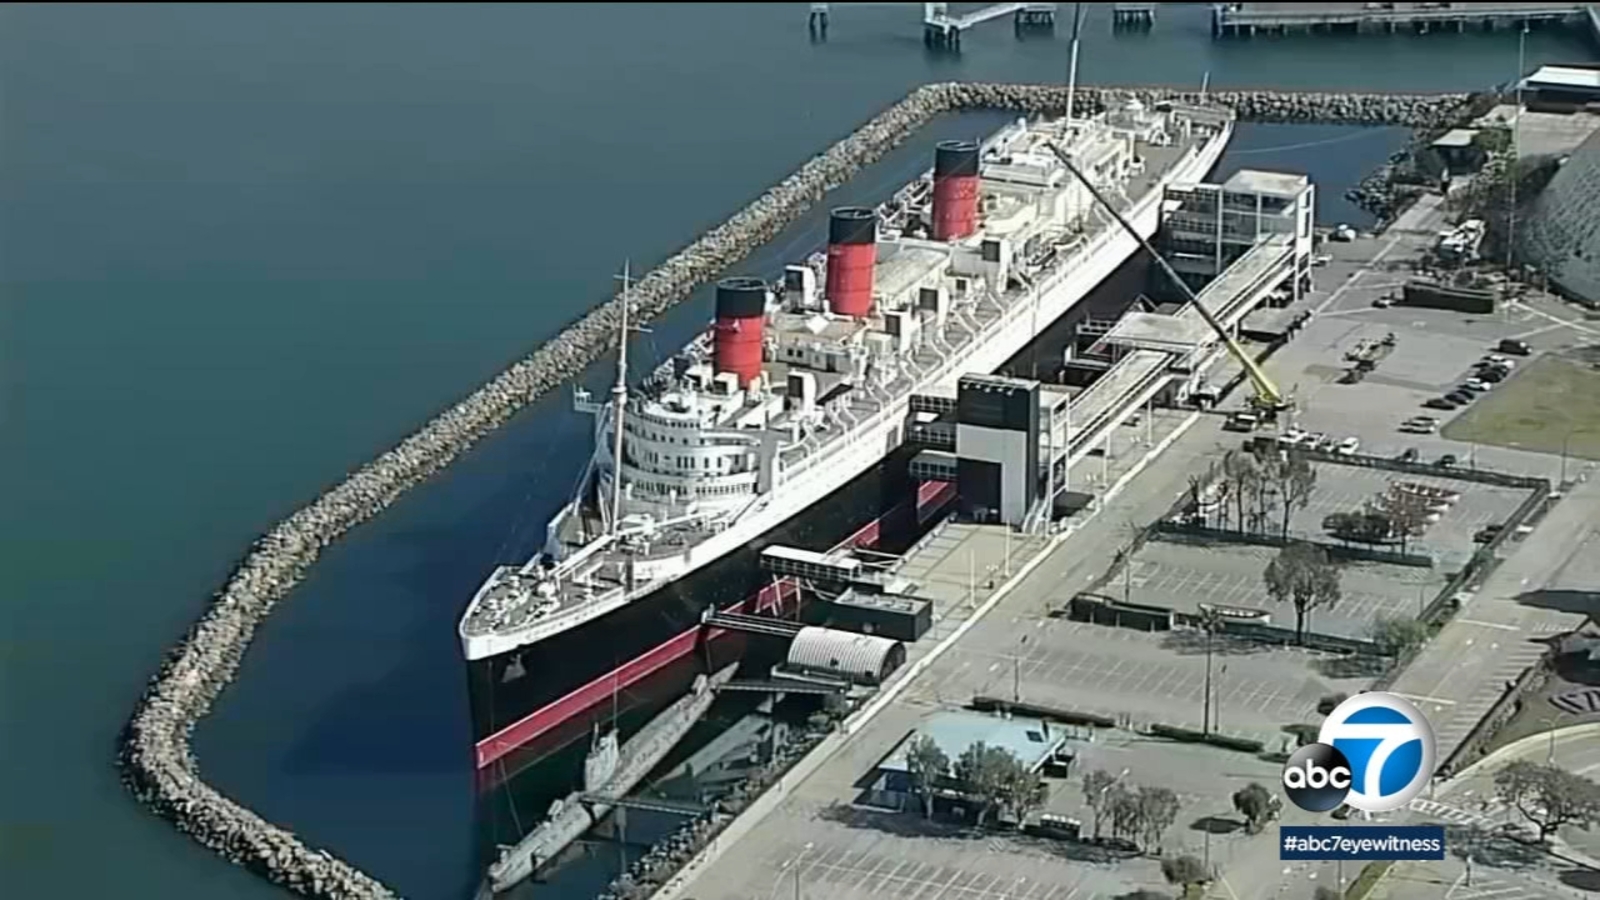 Long Beach's Queen Mary plans to host events again after 2 years, includes summer music festival